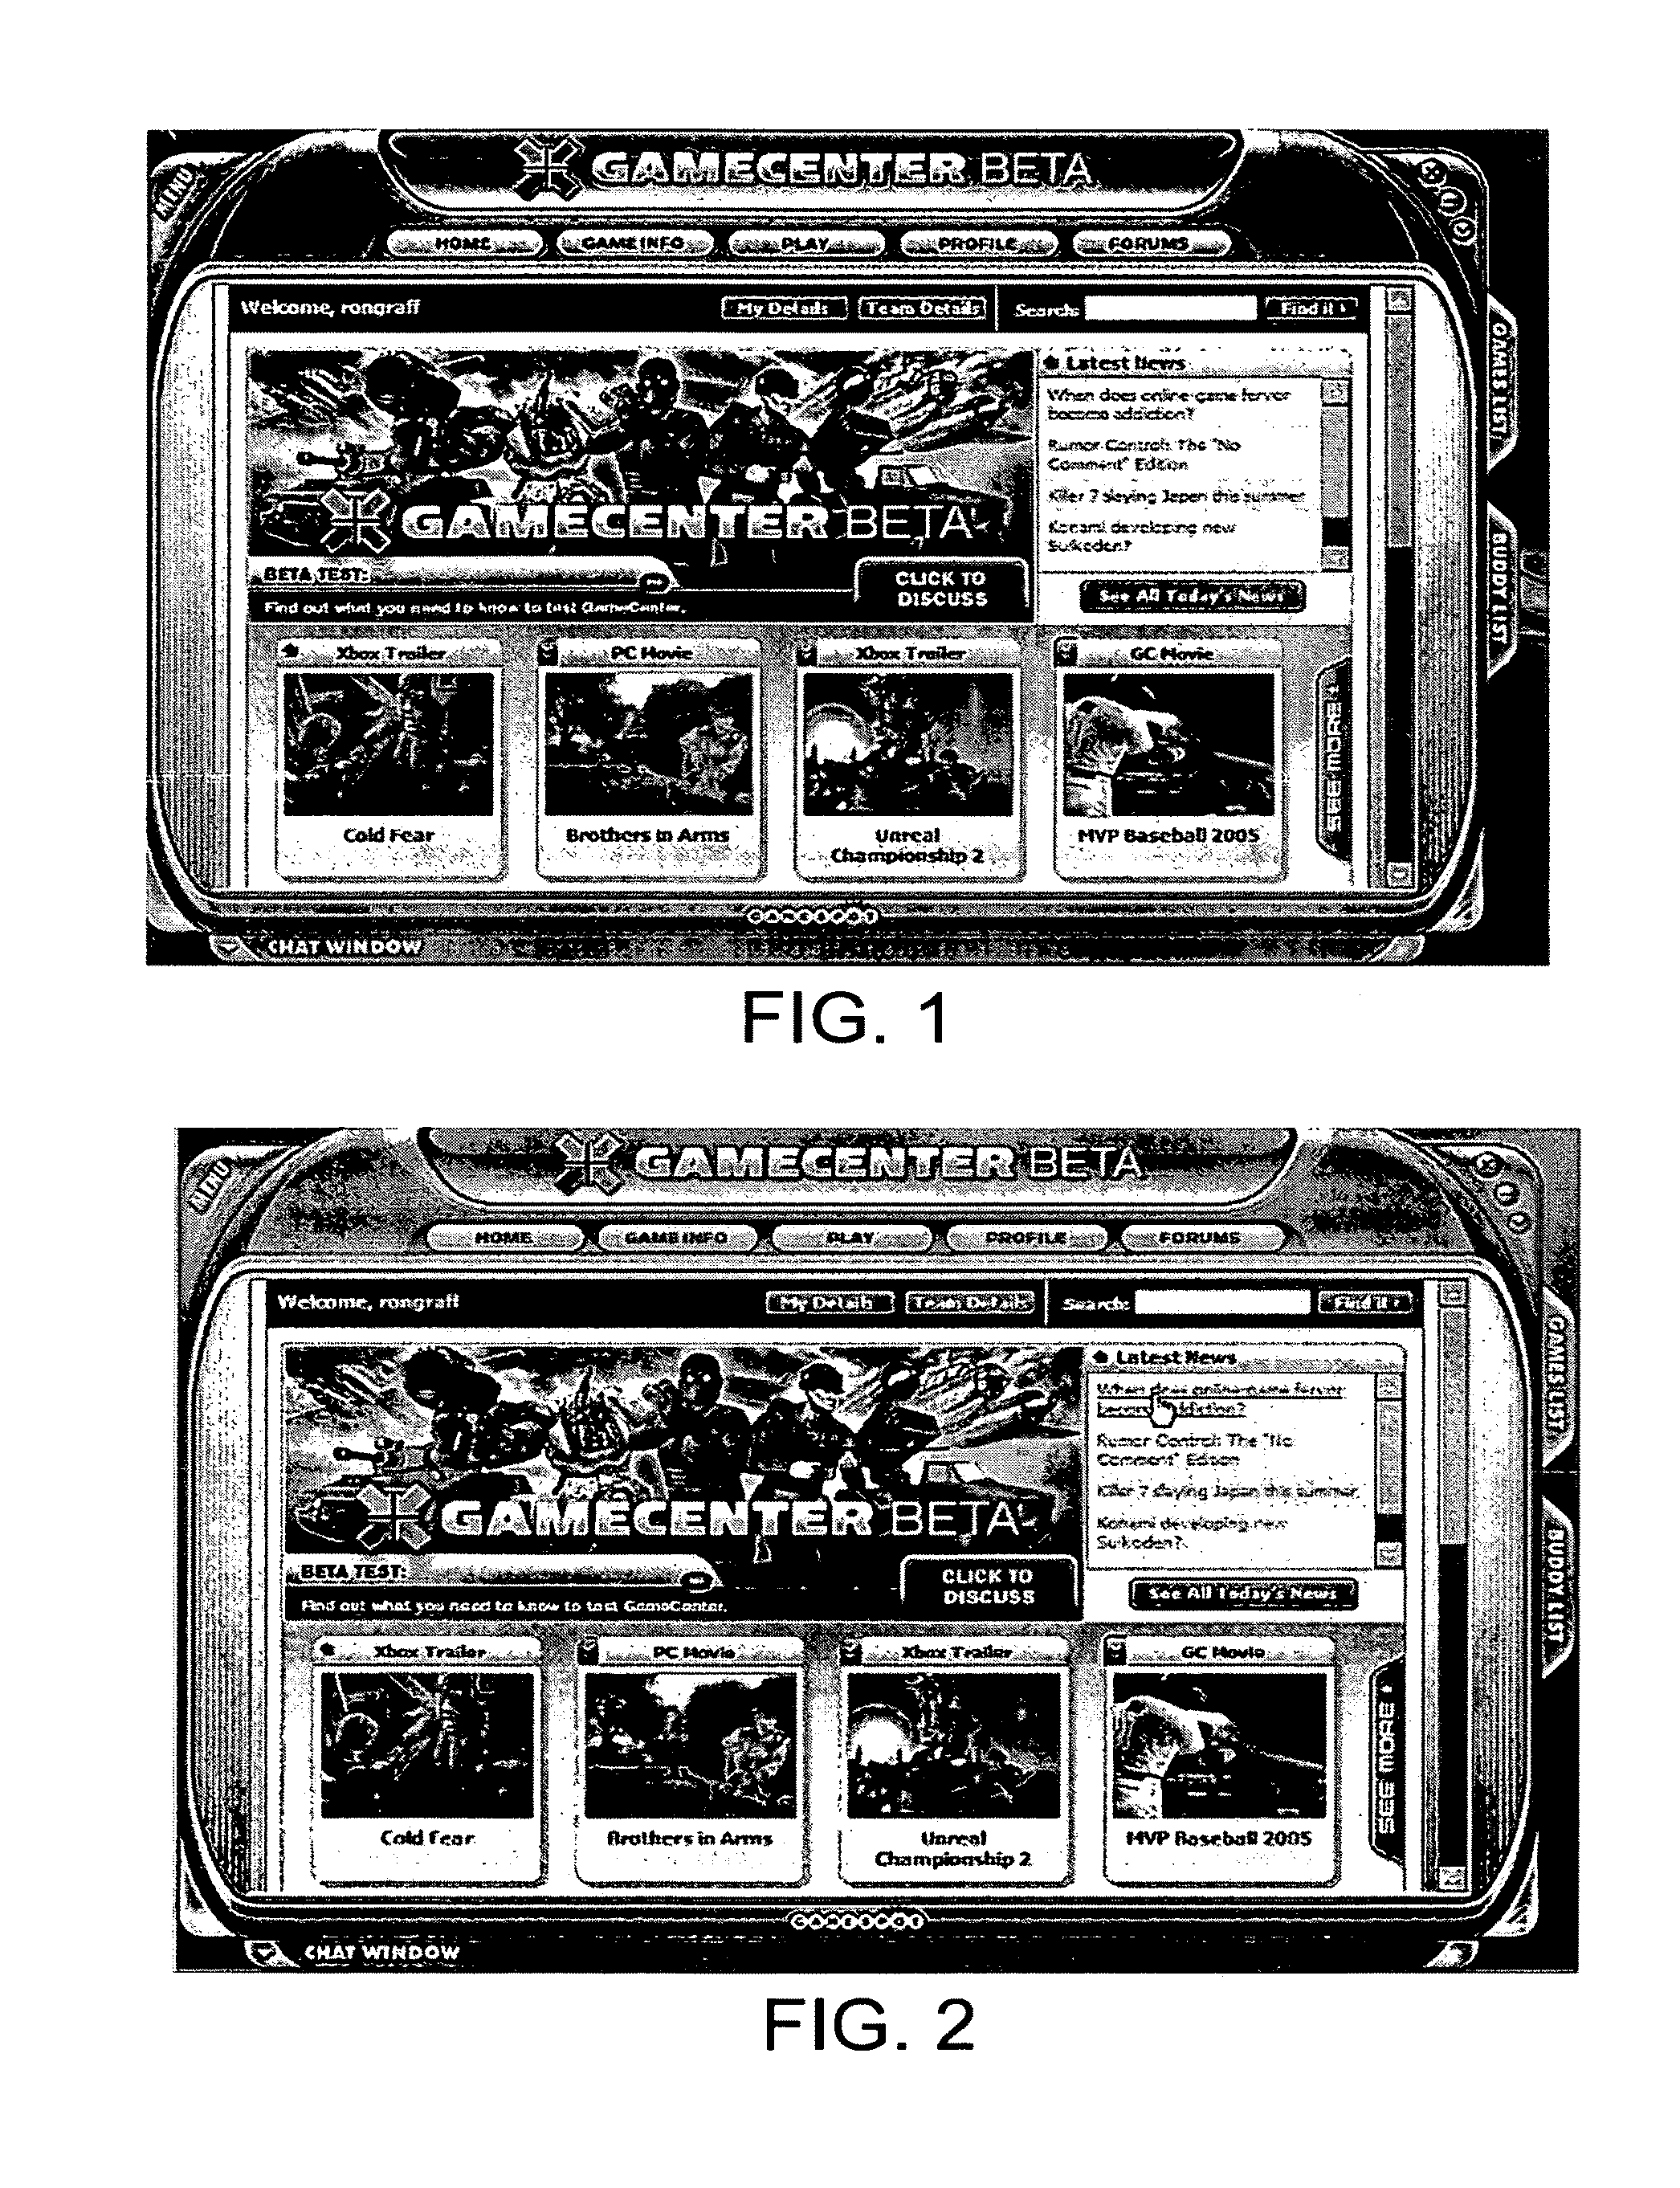 Collaborative online gaming system and method